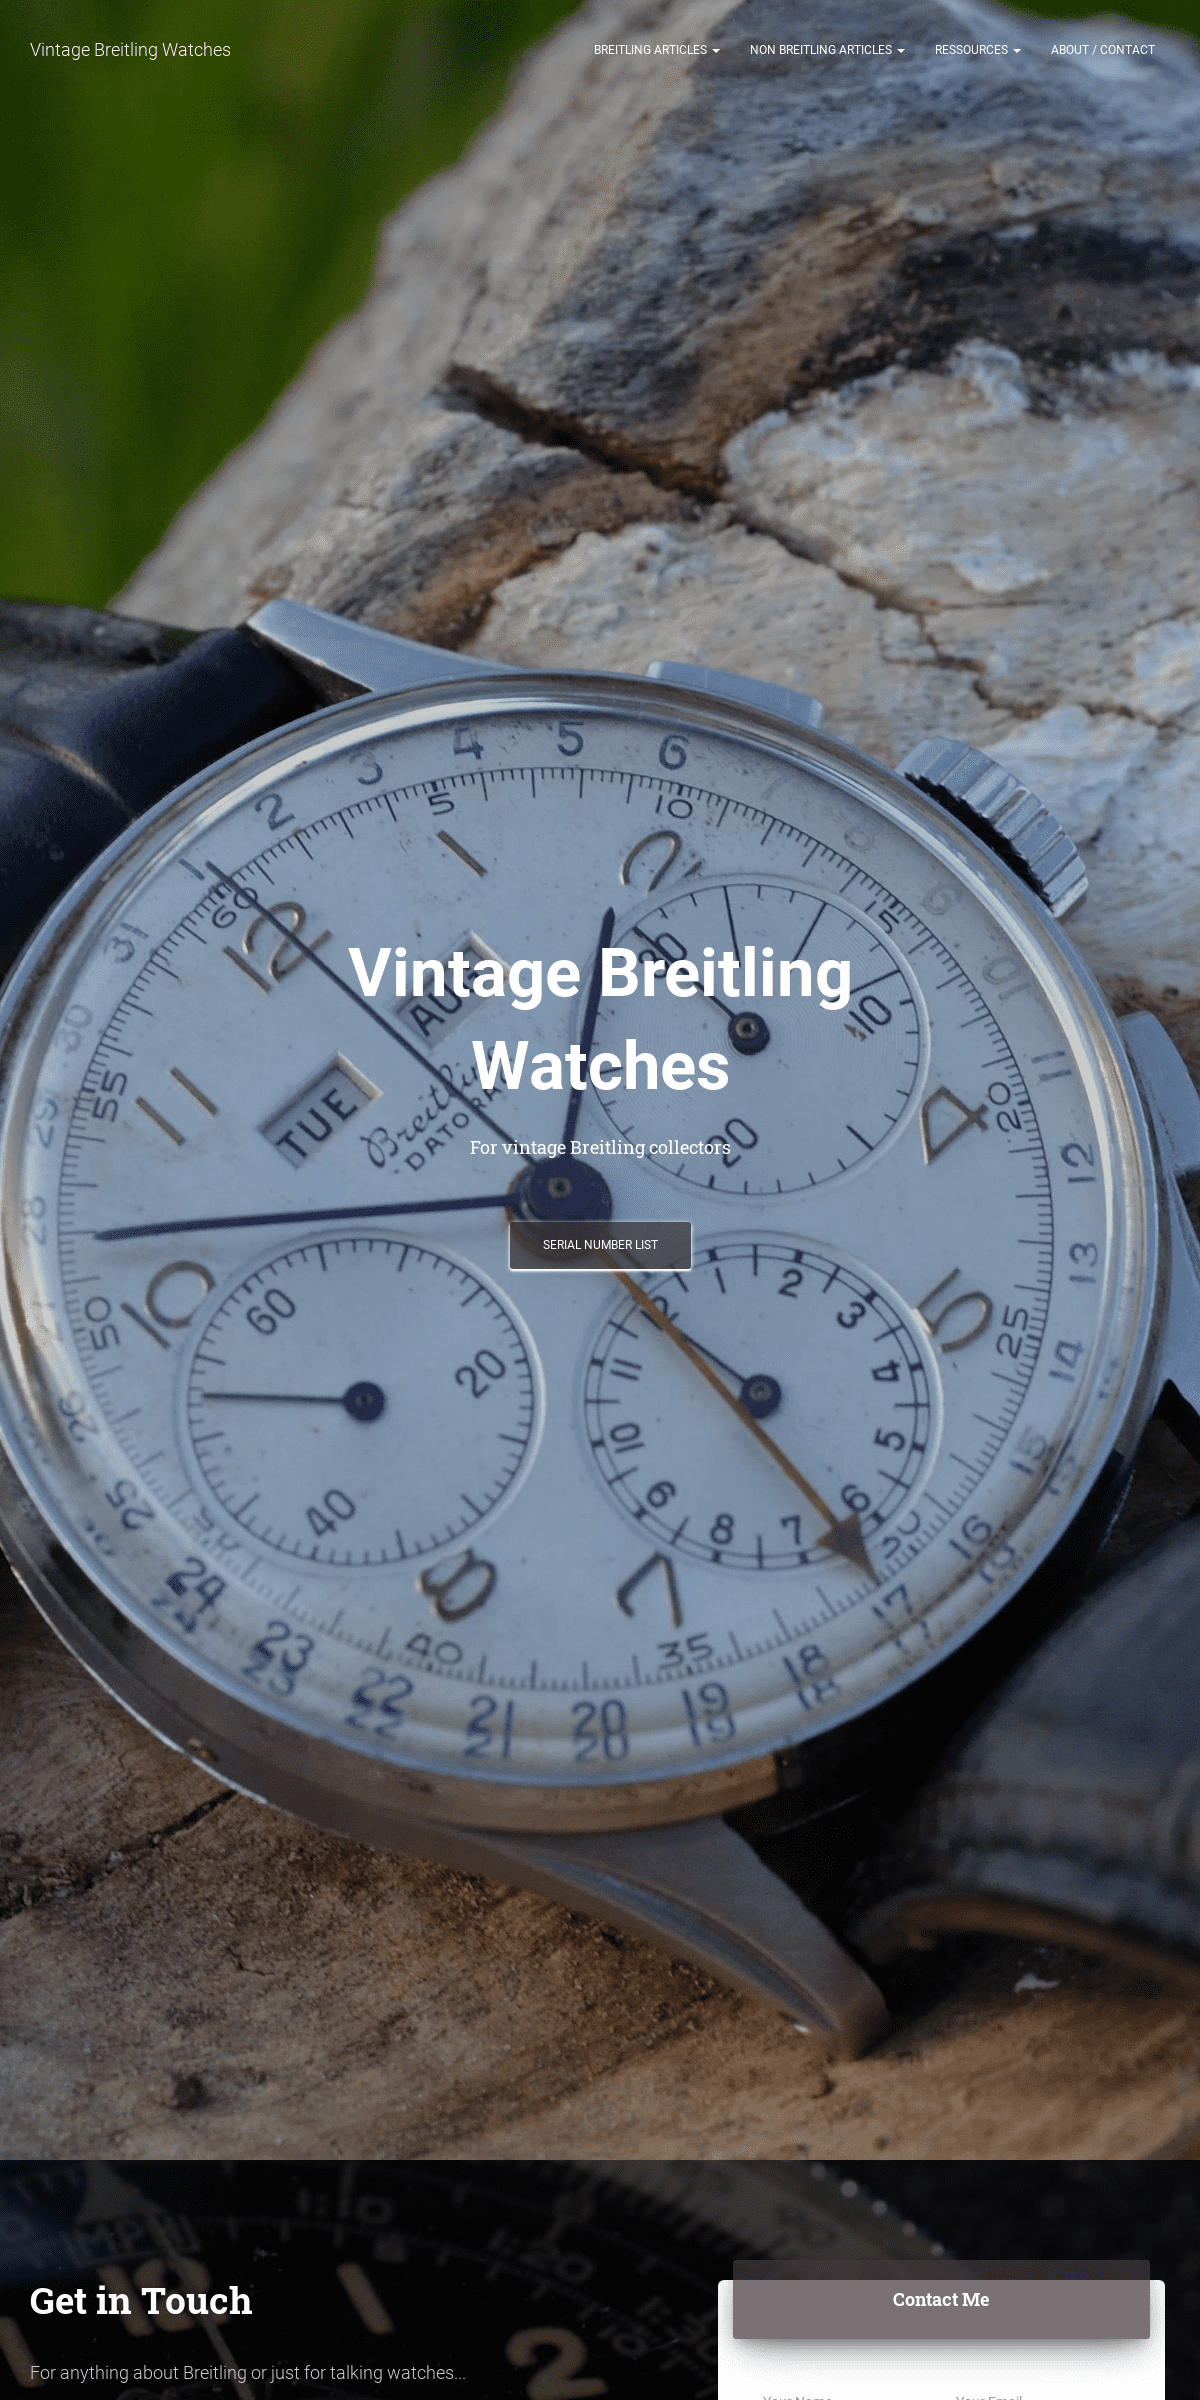 A complete backup of vintage-breitling-watches.com